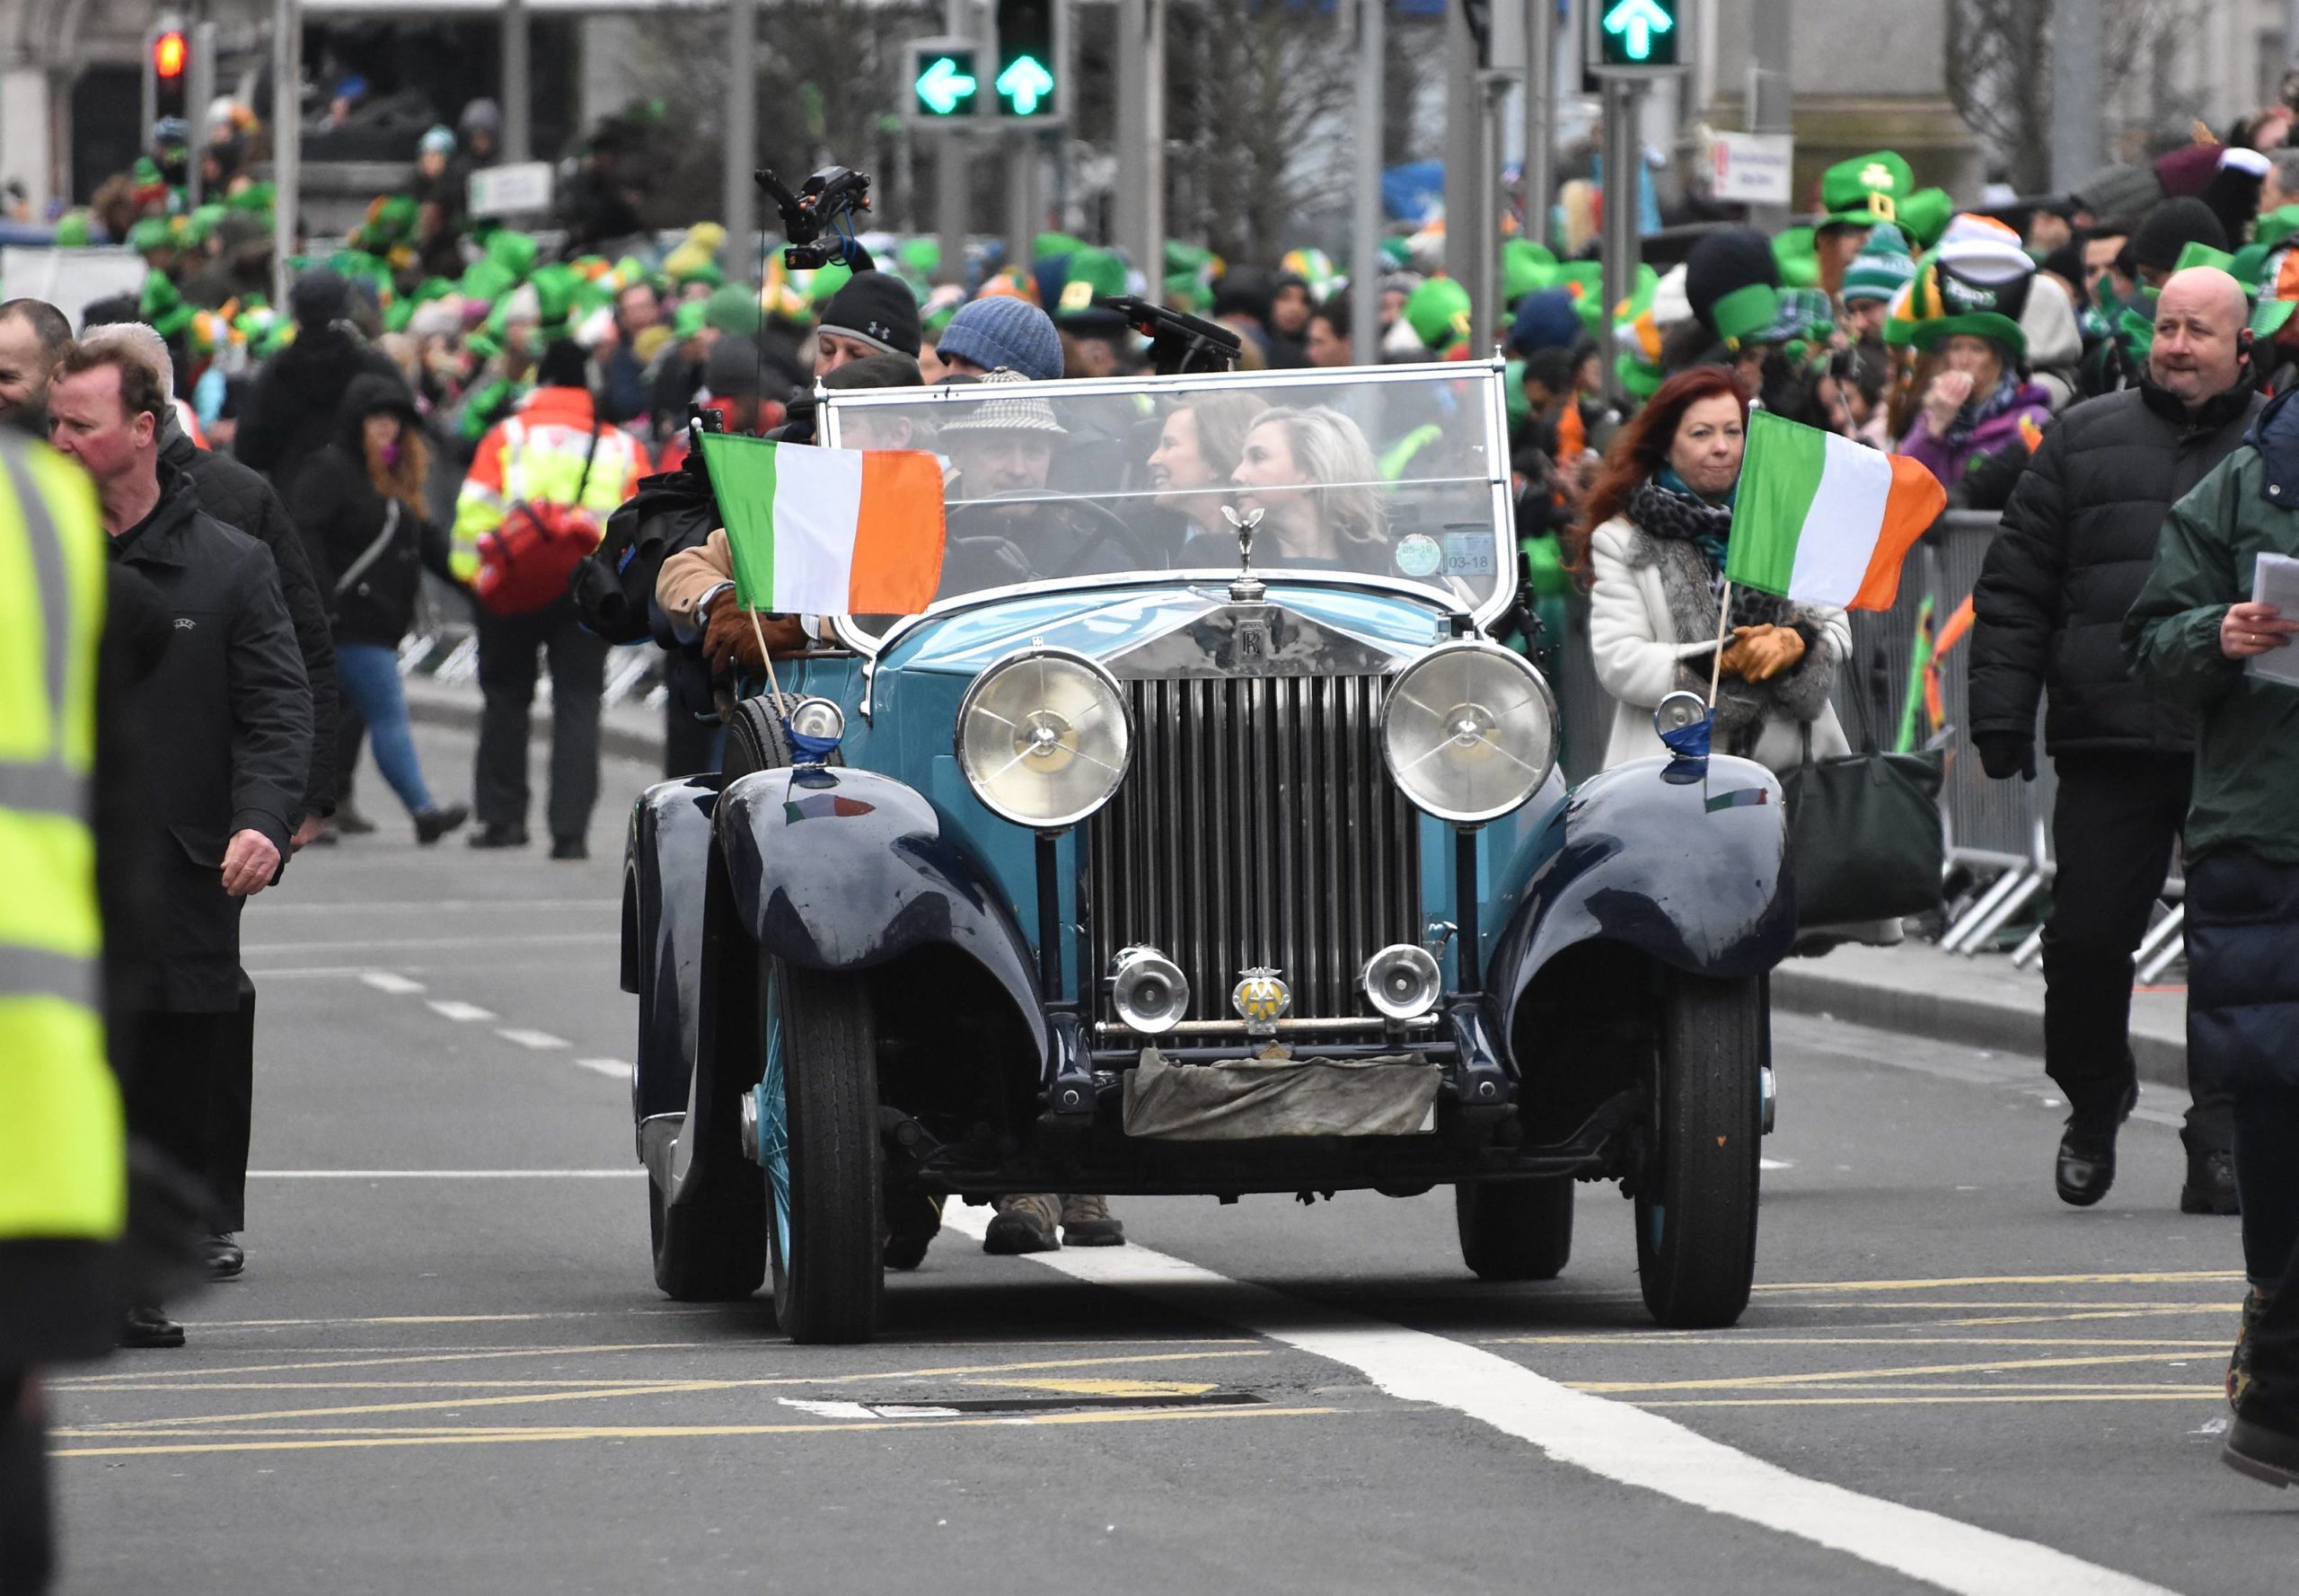 The 10 biggest St. Patrick's Day parades around the world